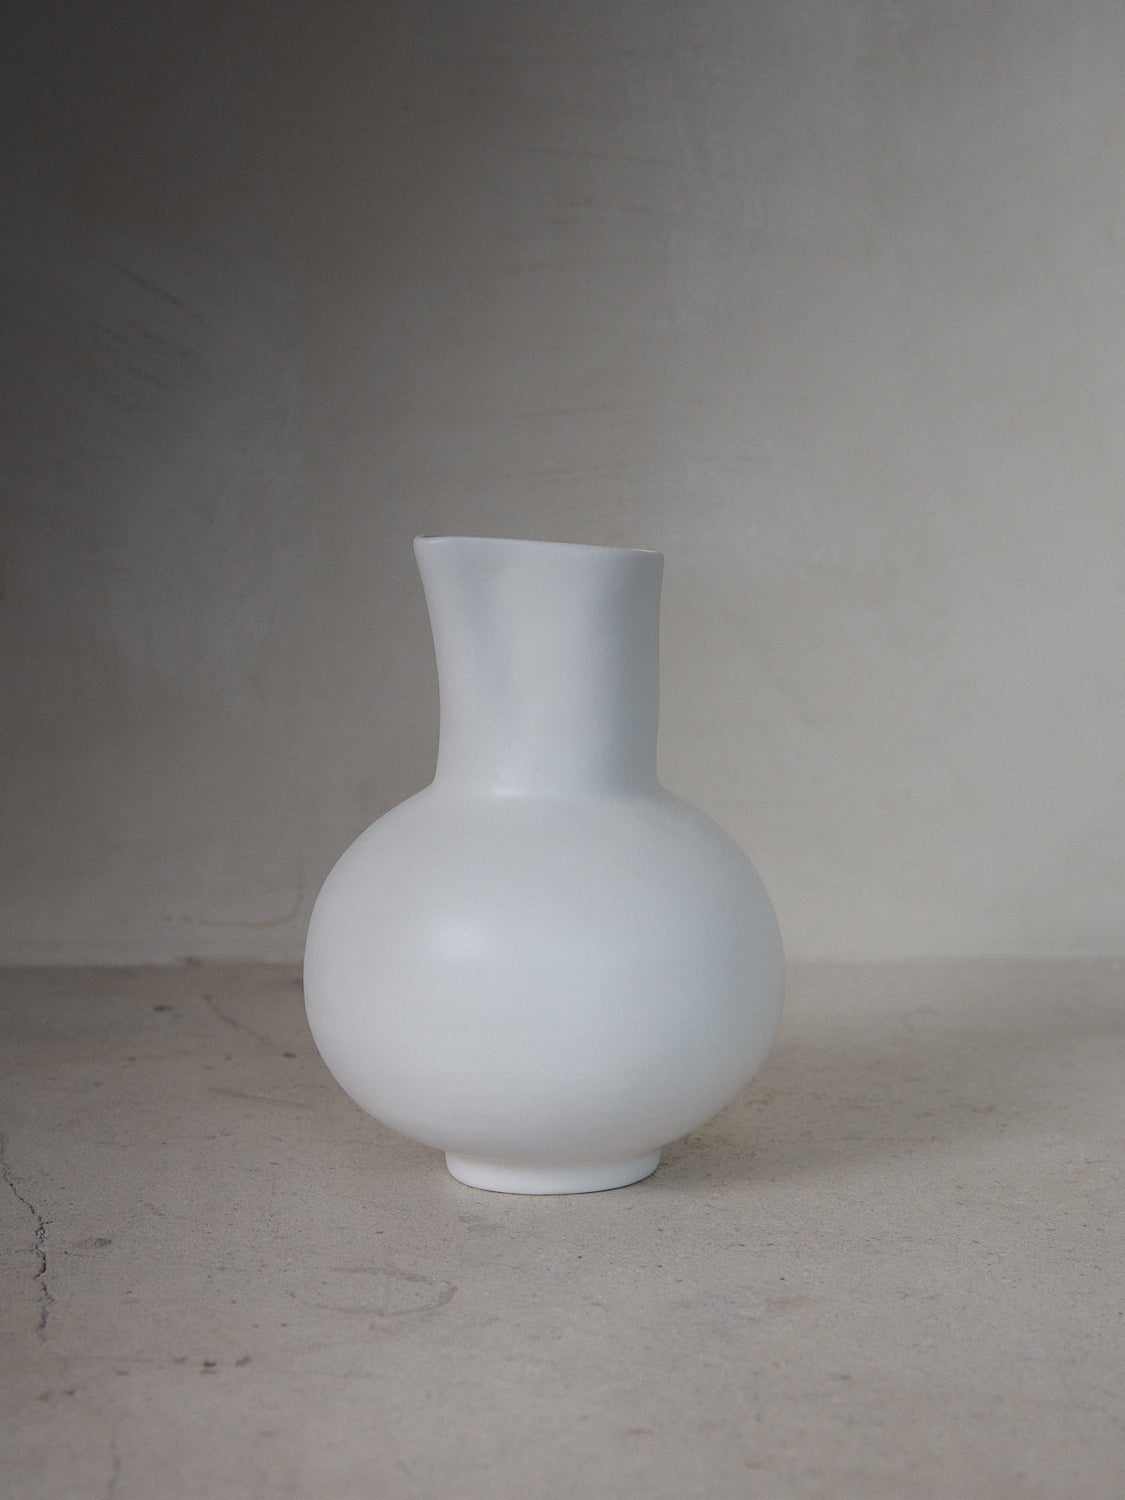 Water Pitcher. Footed stoneware jug with wide, rounded bodice and narrow, spouted neck 